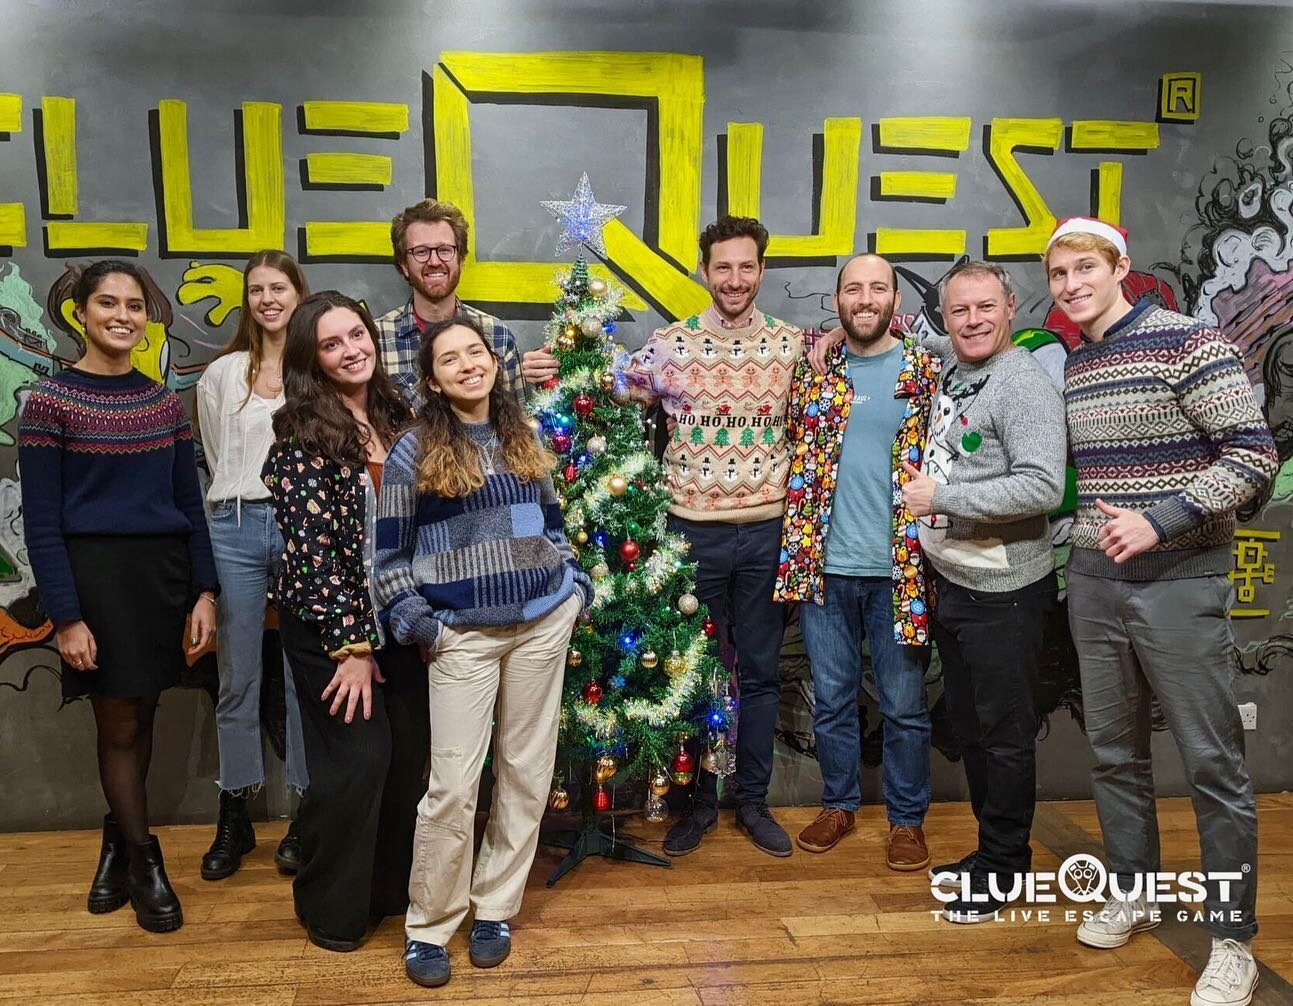 The Hamerkop team had a well-deserved afternoon of fun to celebrate our accomplishments this past year and to wish everyone happy holidays! 🥳 This involved an office lunch party, a holiday outfit contest (Colin won the grand prize 🏆), a quiz, an es